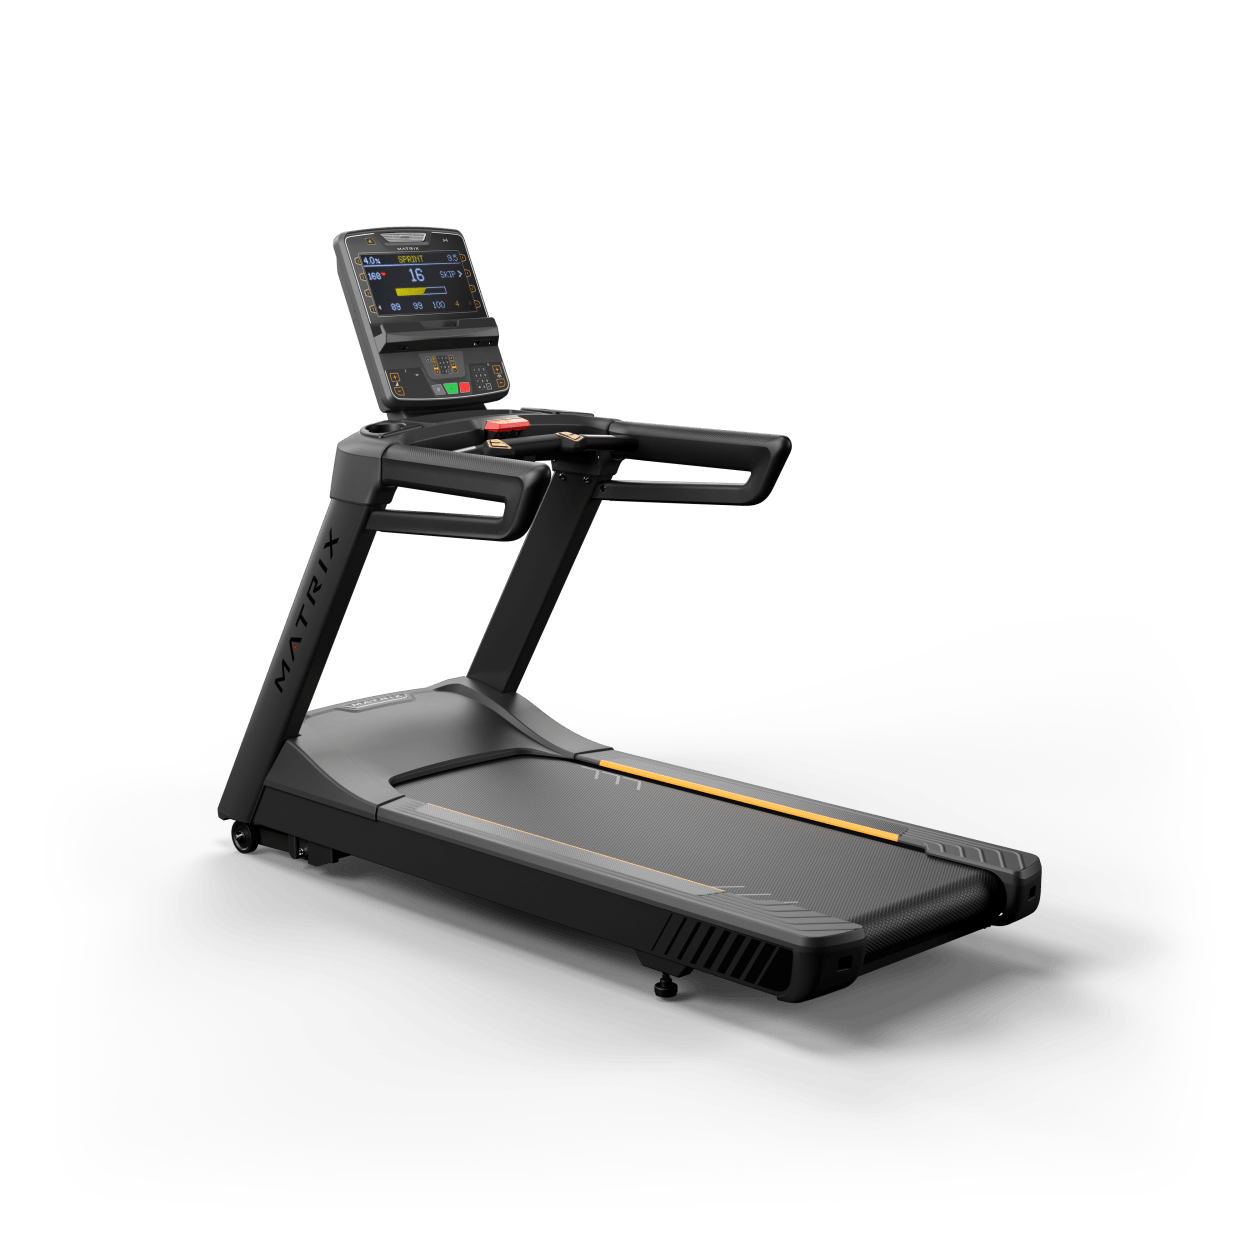 Matrix Fitness Endurance Treadmill with Premium LED Console full view | Fitness Experience